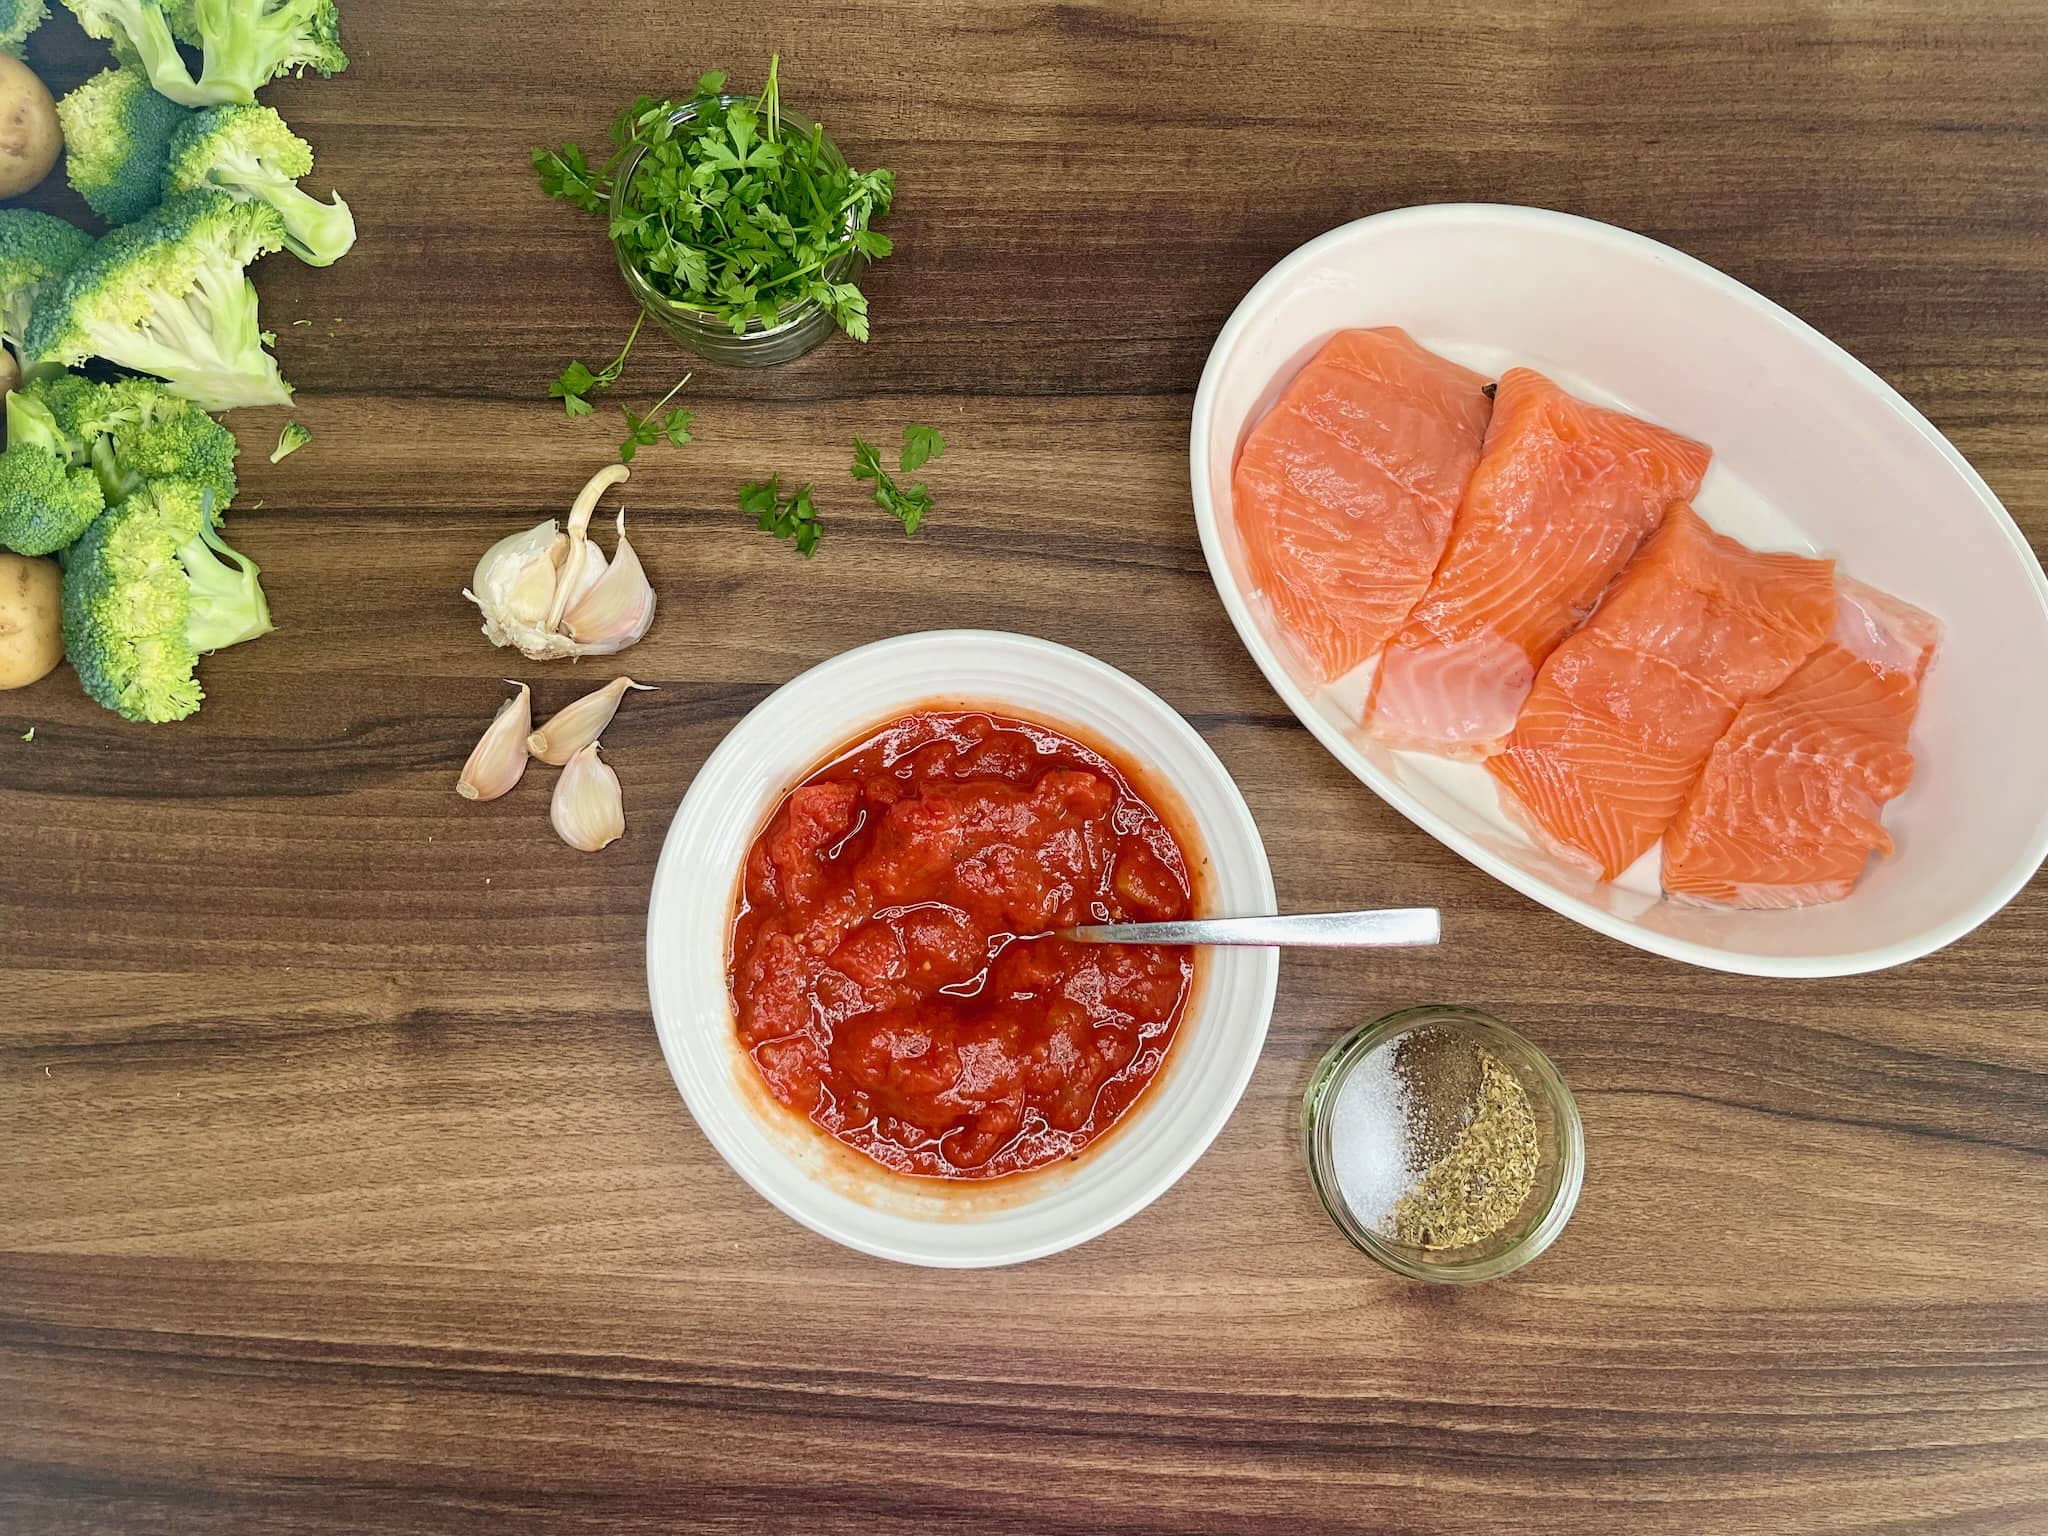 Tomatoes are in a bowl, spices are on the side, and salmon is lined in an ovenproof baking dish, ready to make oven-baked salmon in tomato sauce